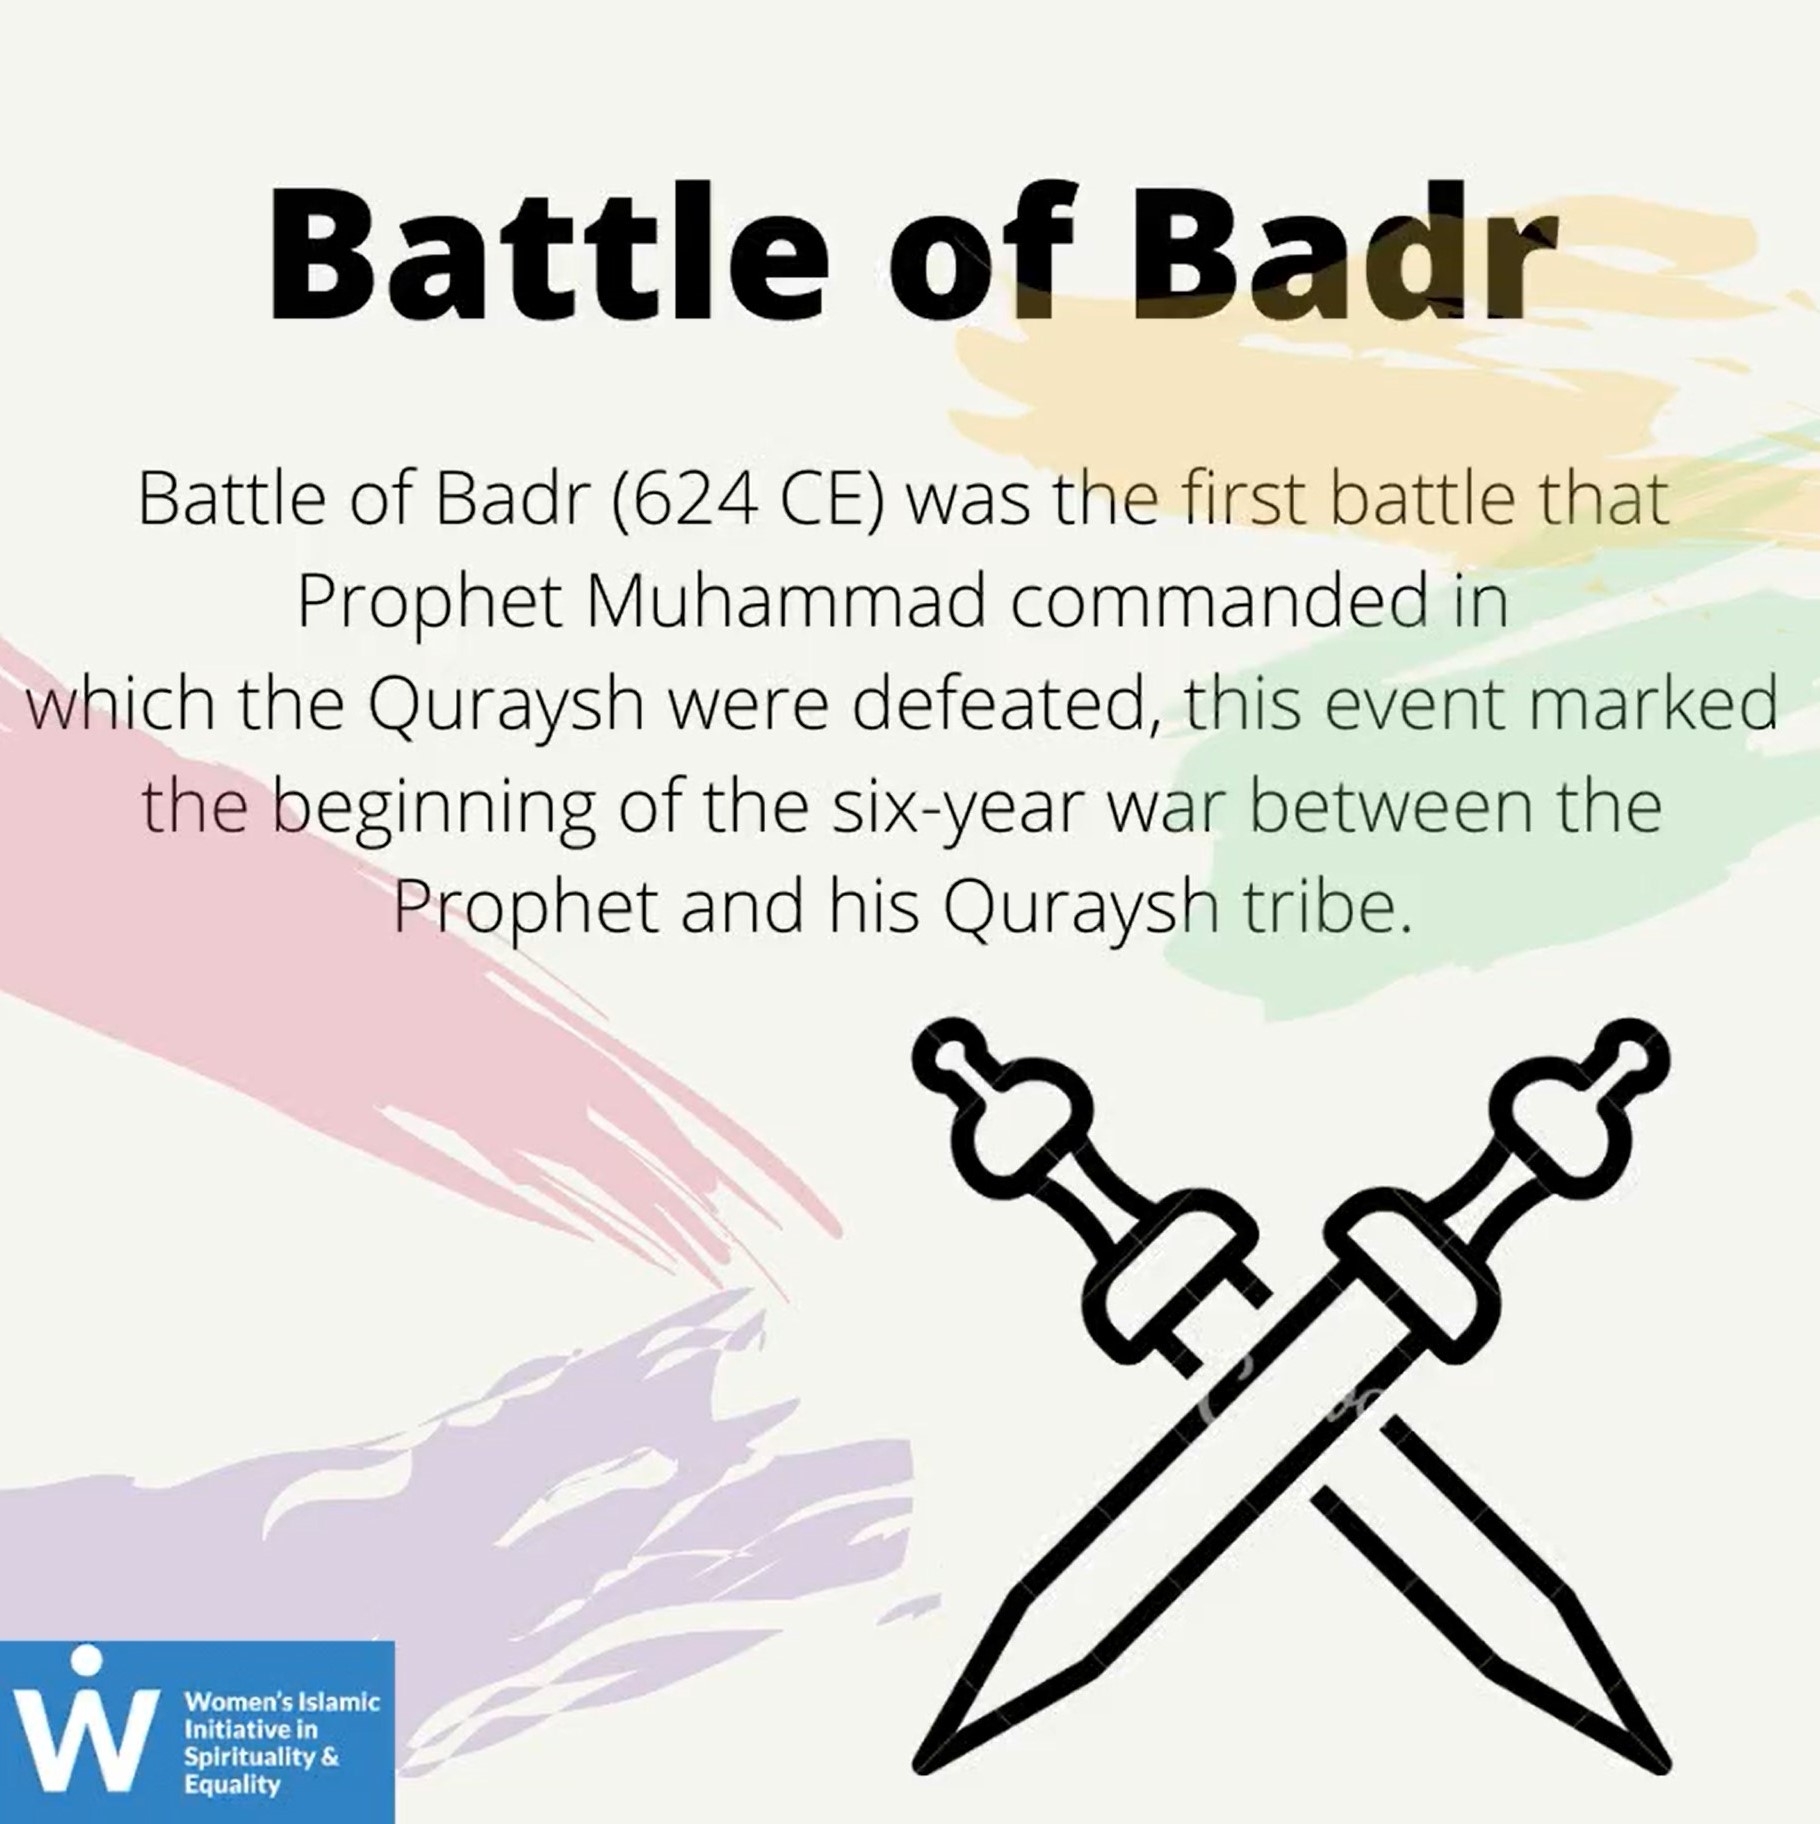 &quot;Battle of Badr (624 CE) was the first battle that Prophet Muhammad commanded in which the Quraysh were defeated, this event marked the beginning of the six-year war between the Prophet and his Quraysh tribe.&quot;